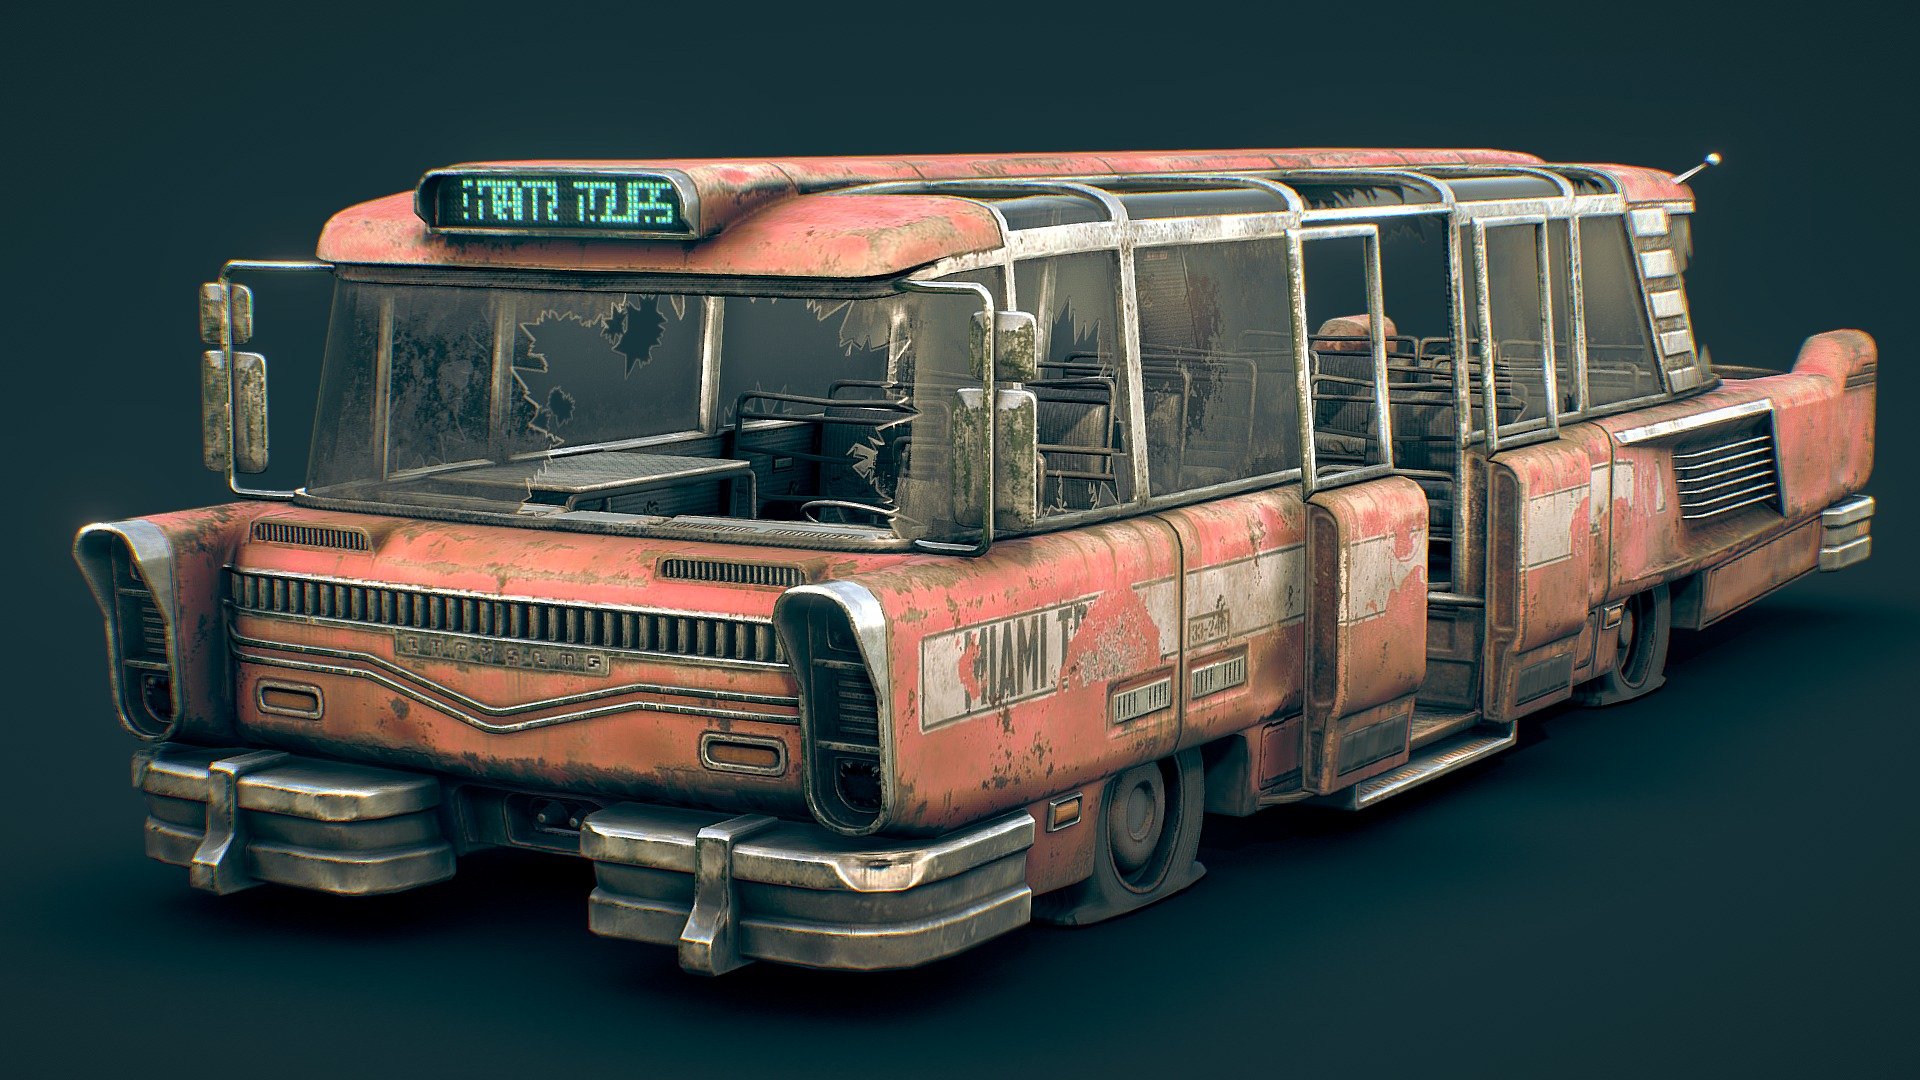 A sightseeing bus for moving around groups of tourists. Lots of glass so you can See™.
I actually based it on a Polish bus prototype SFW 1 Sanok, from 1958. Made for a mod project.
 - Fallout 4 Miami Tourist Bus - 3D model by quaz30 3d model